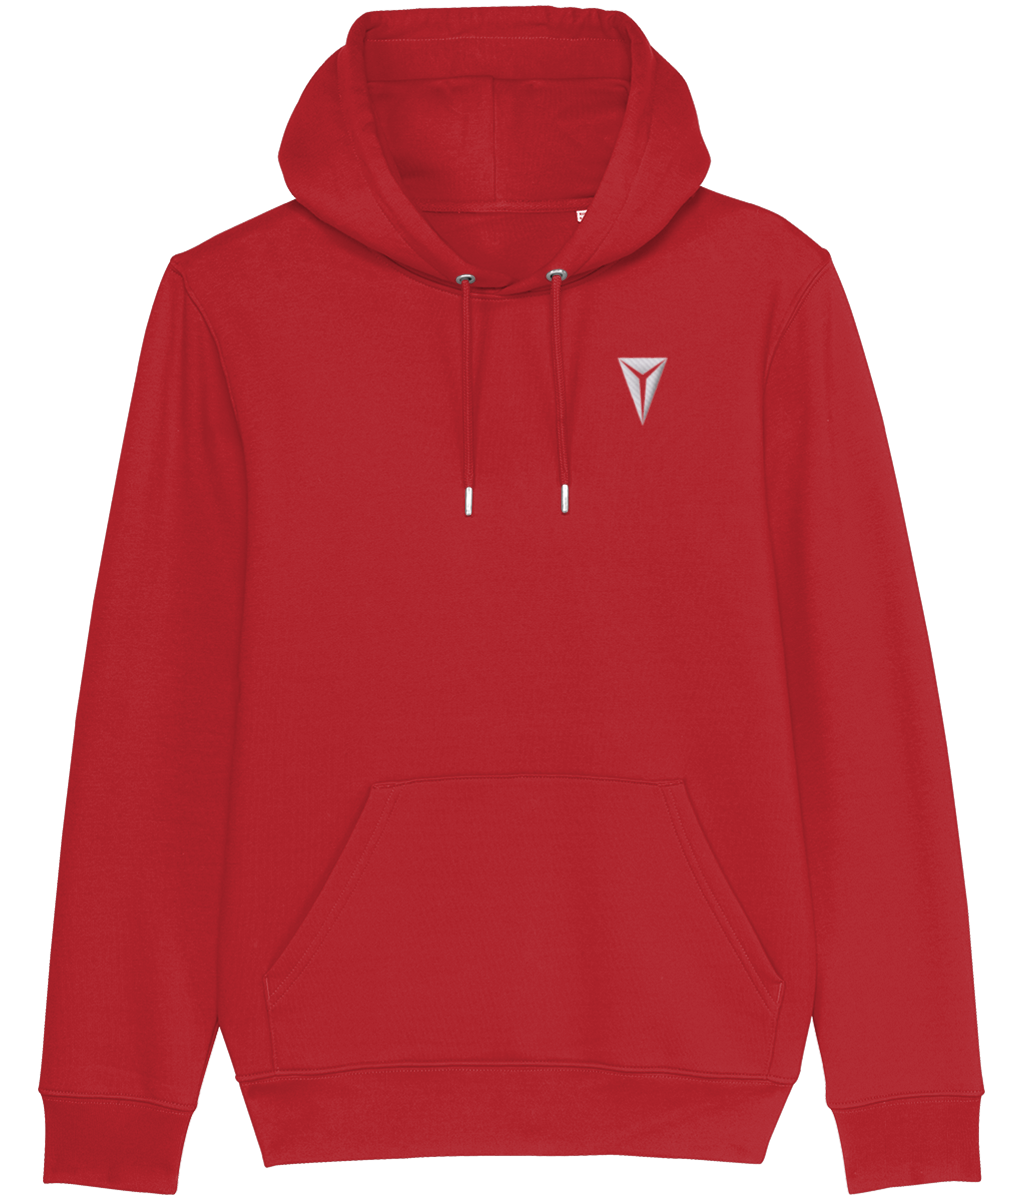 HEX Cruiser Premium Hoodie Embroidered with White Dragon Eye Logo Bright Red